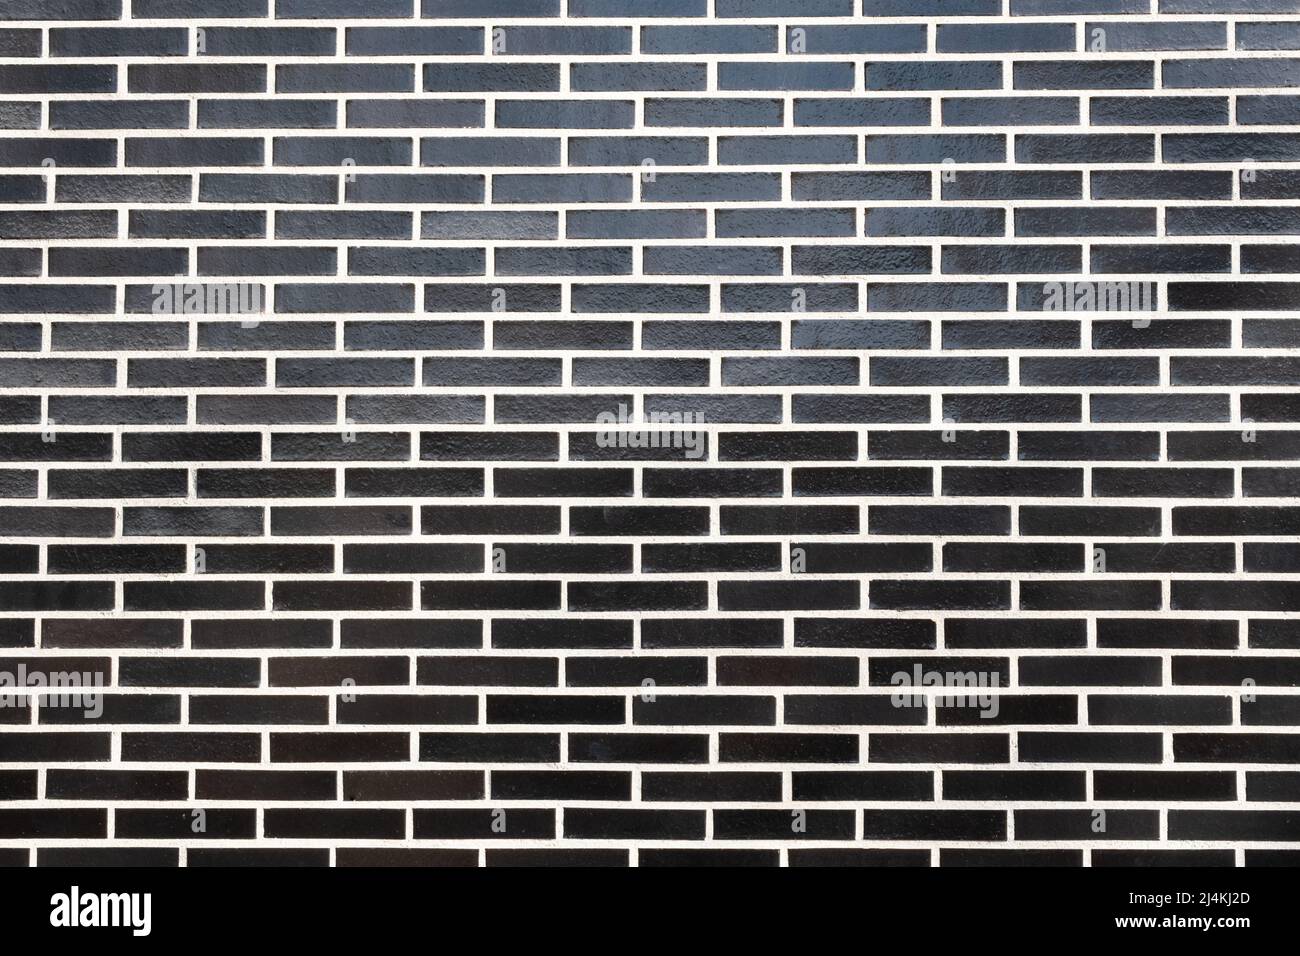 A black brick wall texture with white grout, horizontal orientation. Great seamless background for different purposes, copy space for text. Stock Photo